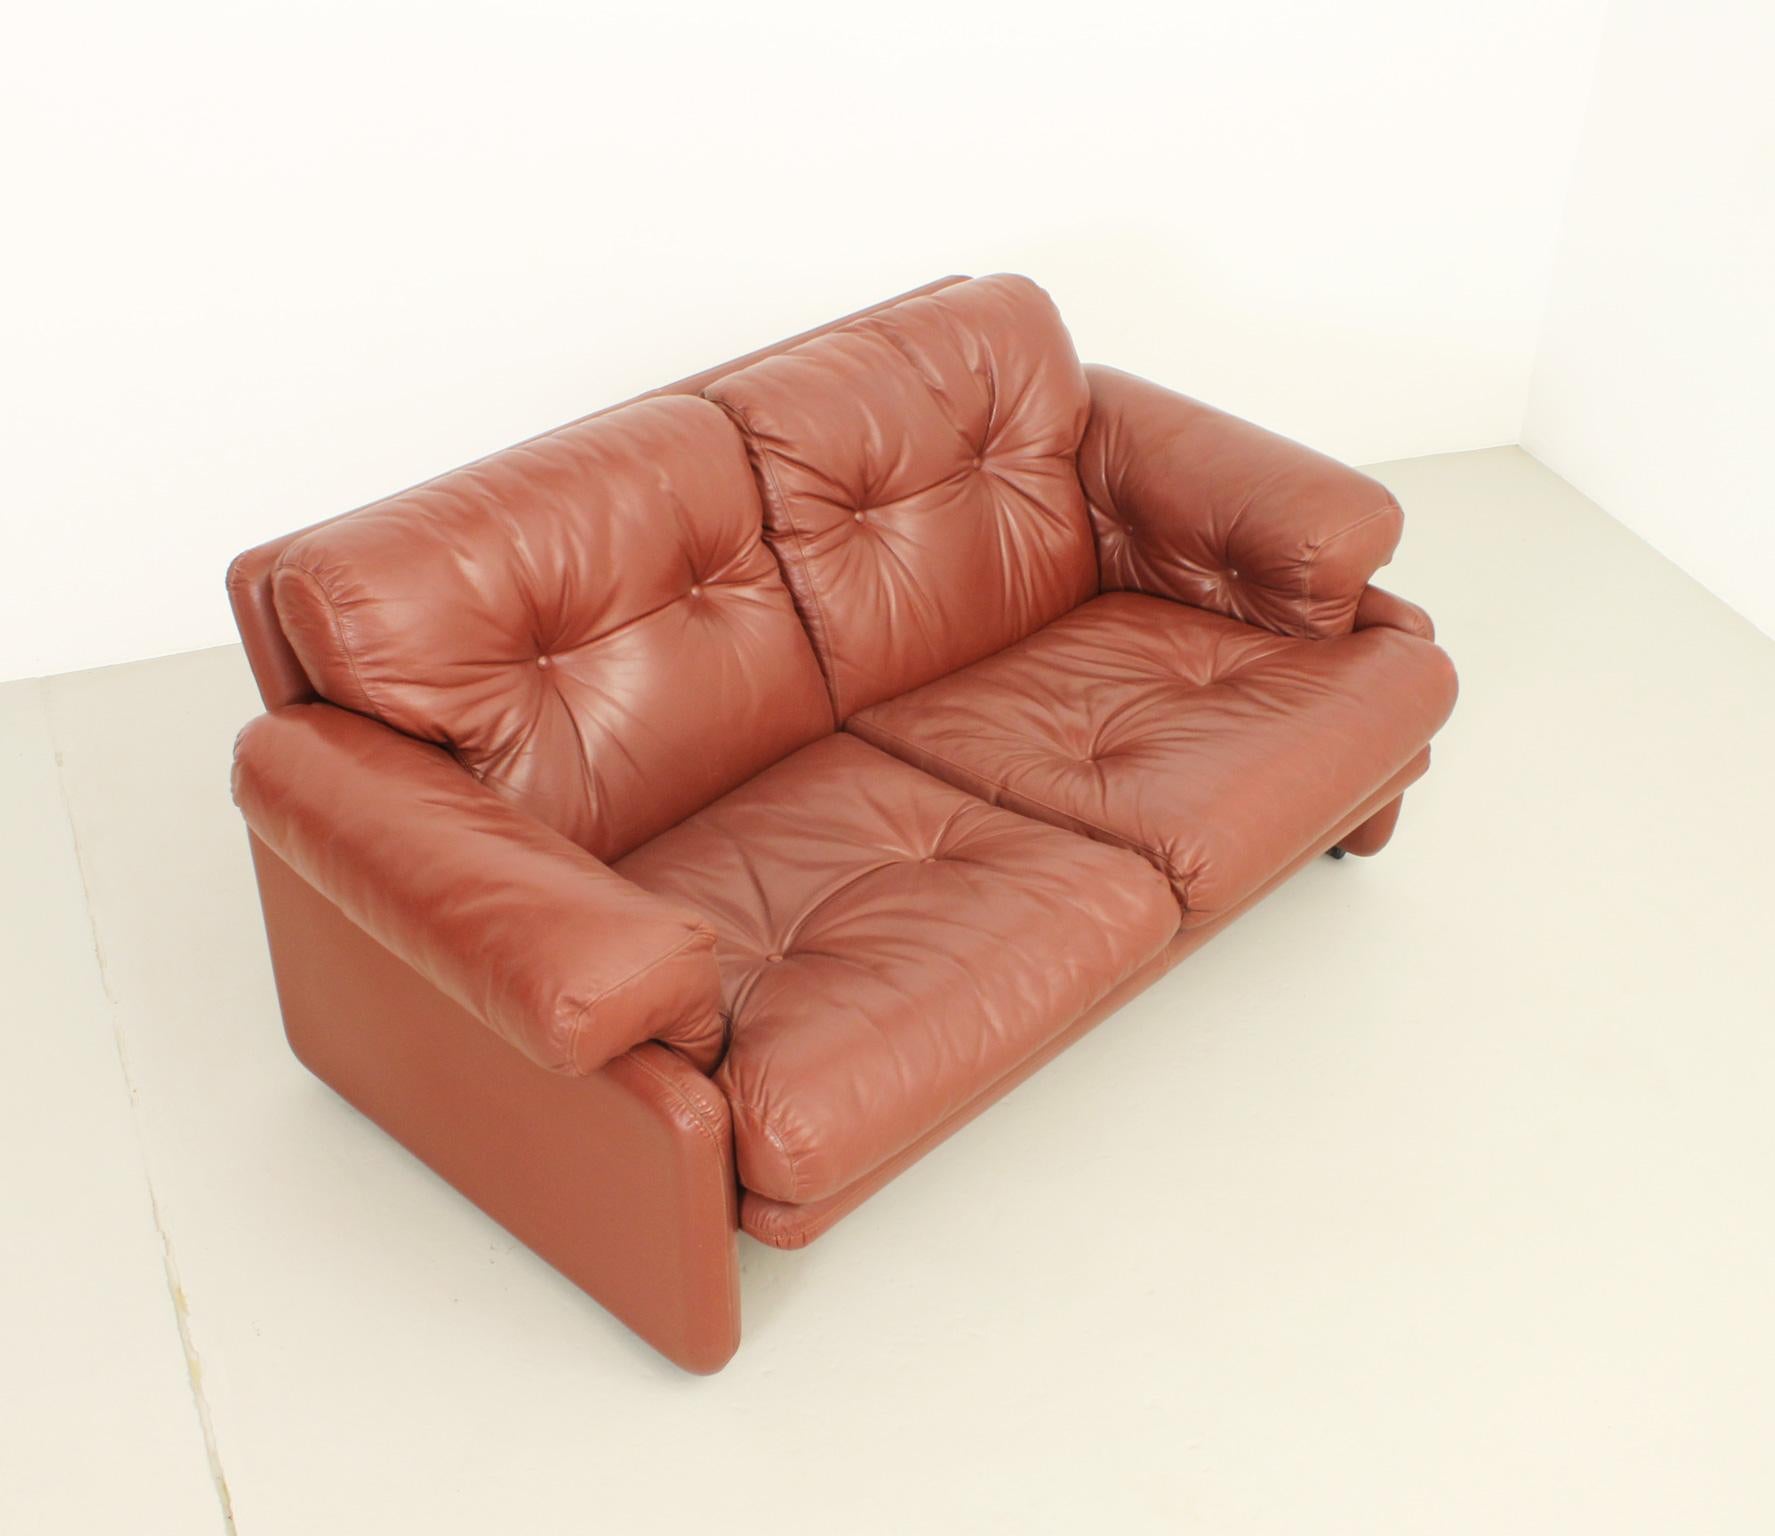 Coronado Two-seater Sofa by Tobia Scarpa in Cognac Leather, 1969 For Sale 3